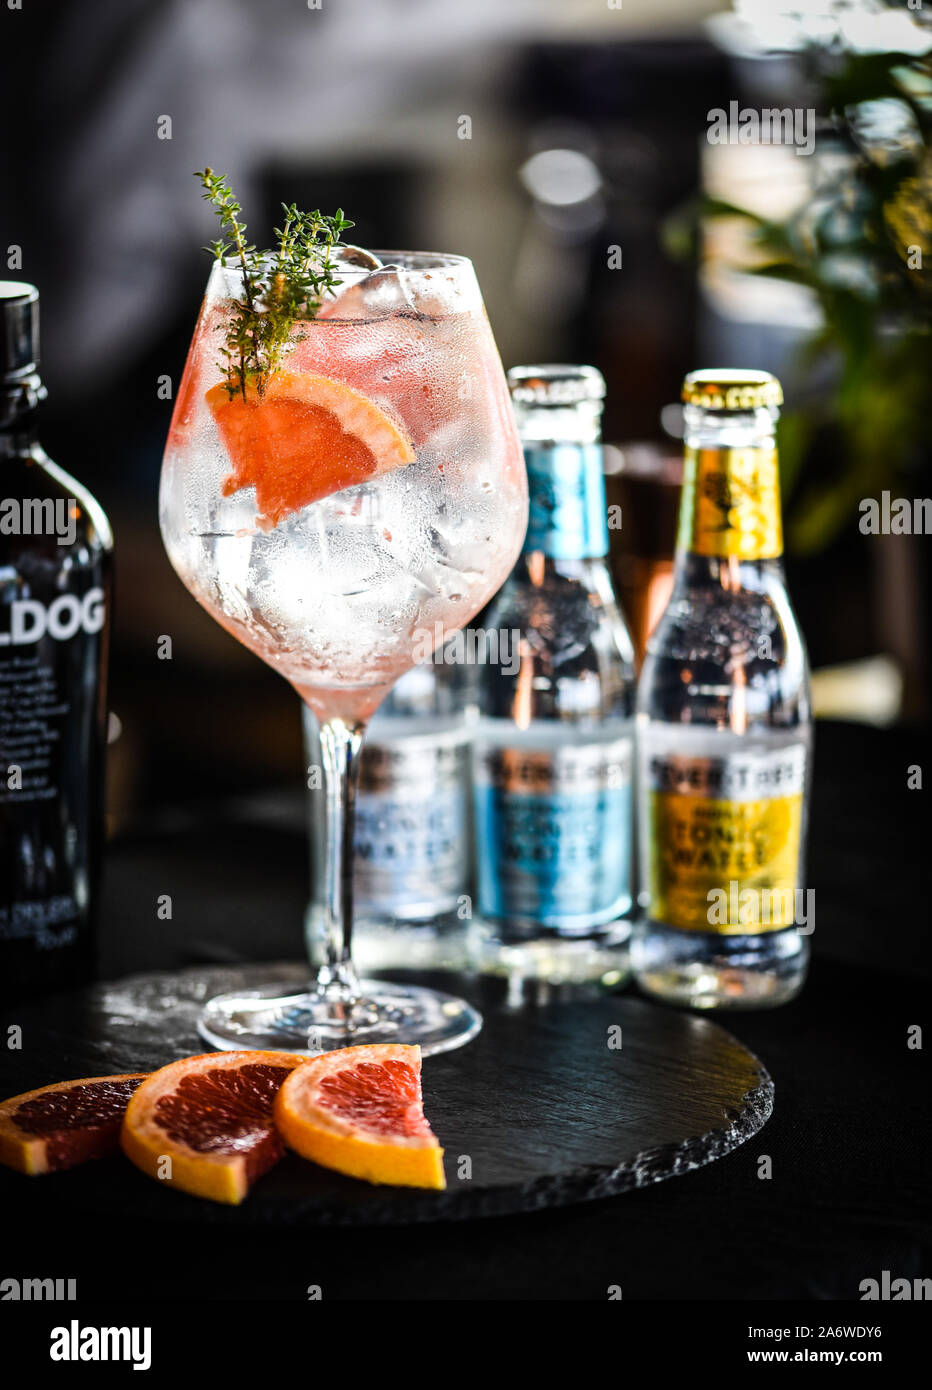 fresh gin tonic beverage with fruits & spices Stock Photo